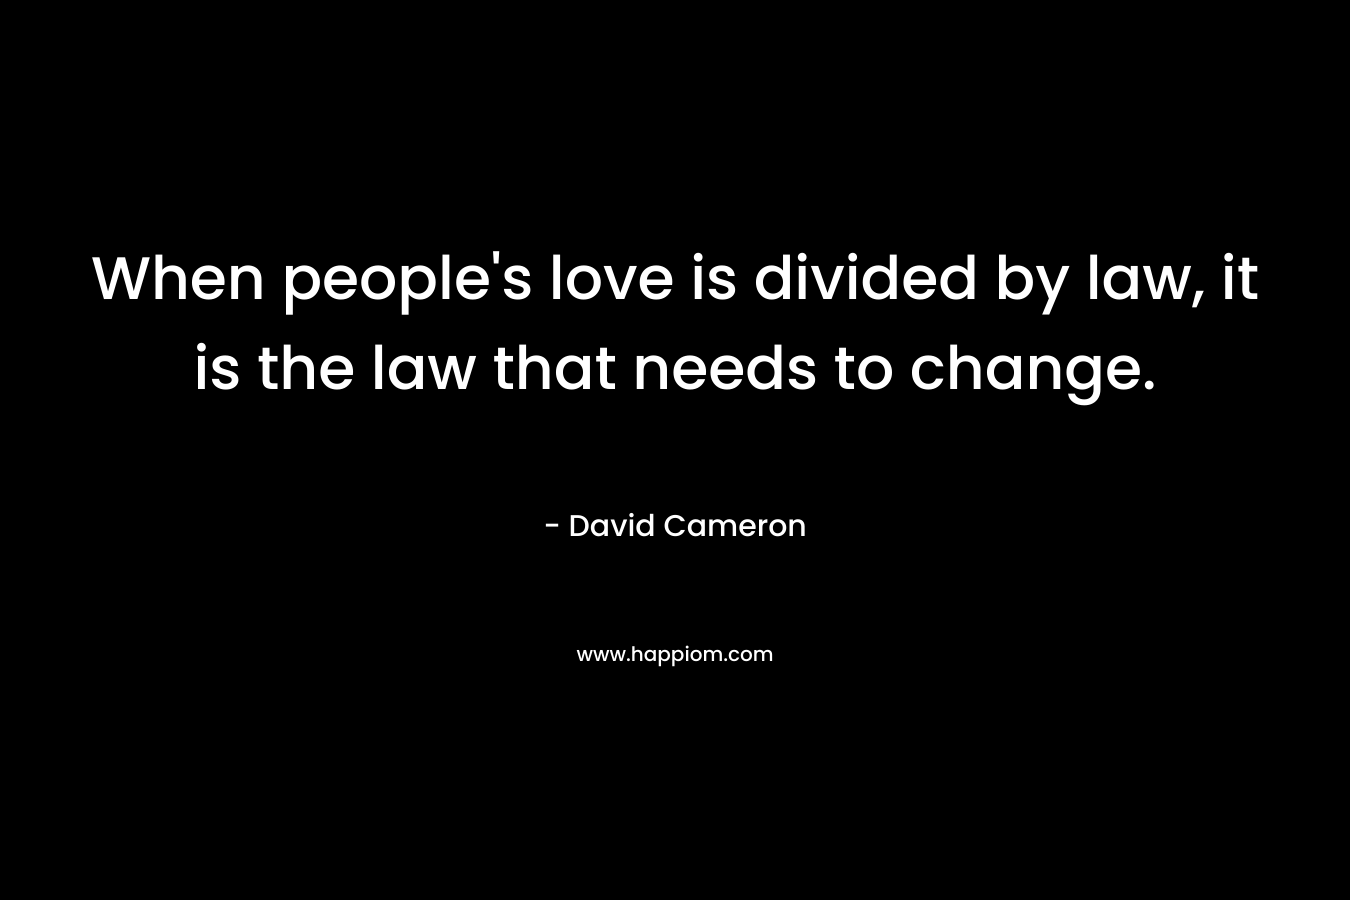 When people's love is divided by law, it is the law that needs to change.